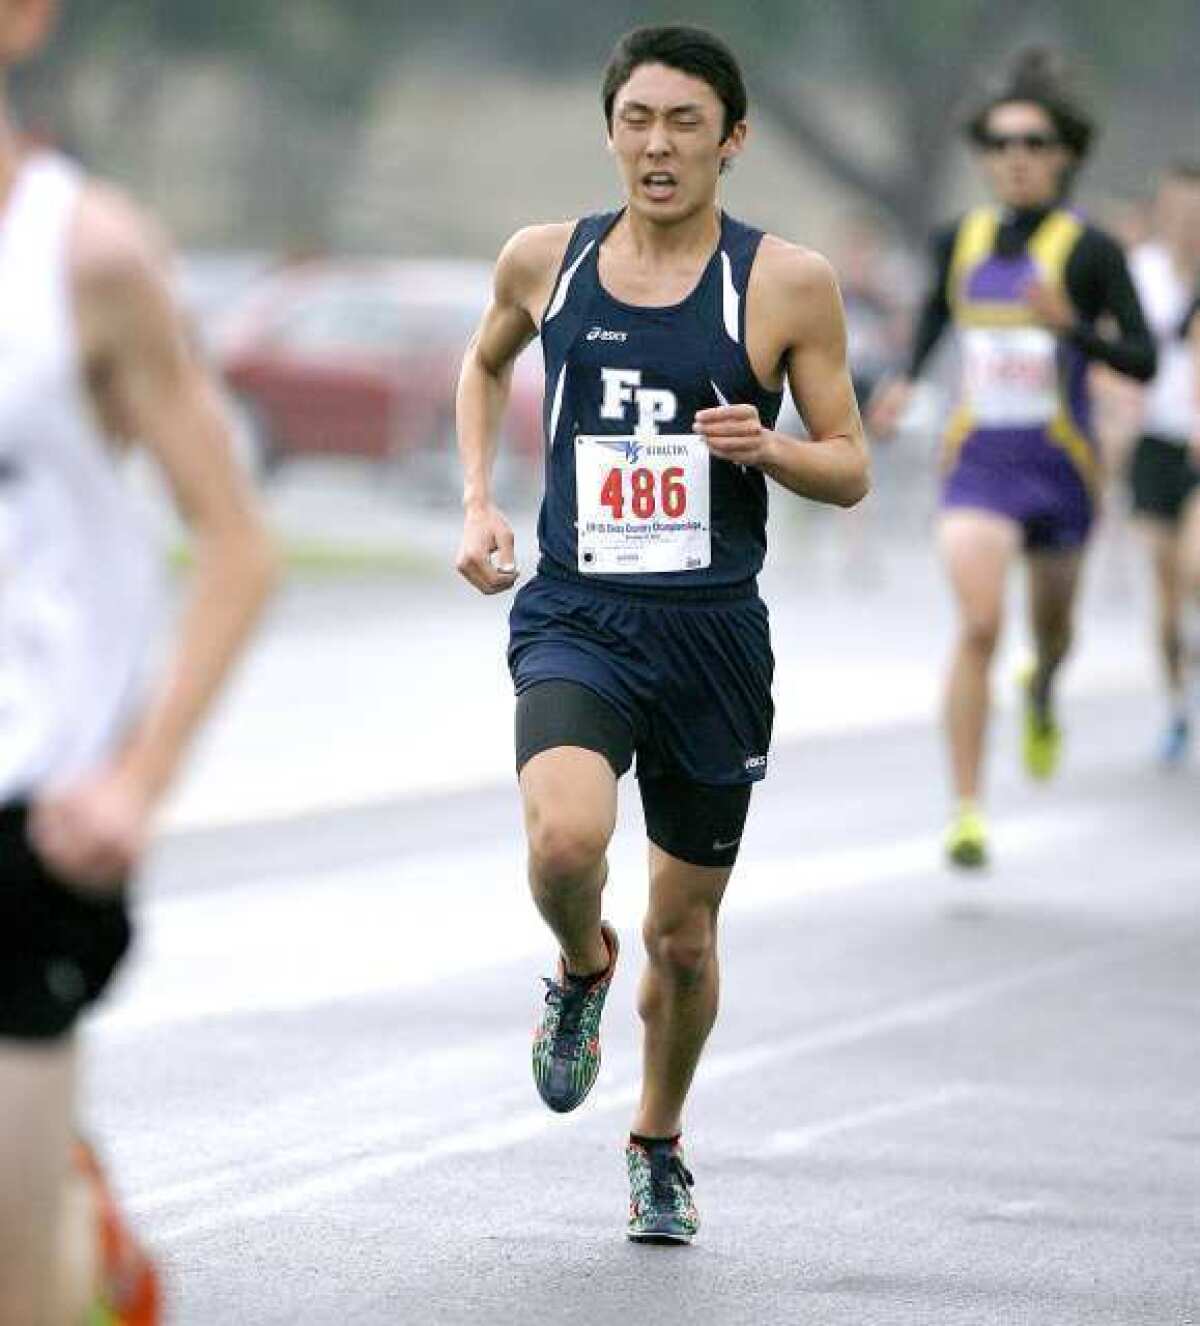 Flintridge Prep senior Aaron Sugimoto led the team by finishing sixth in 15 minutes, 4 seconds.